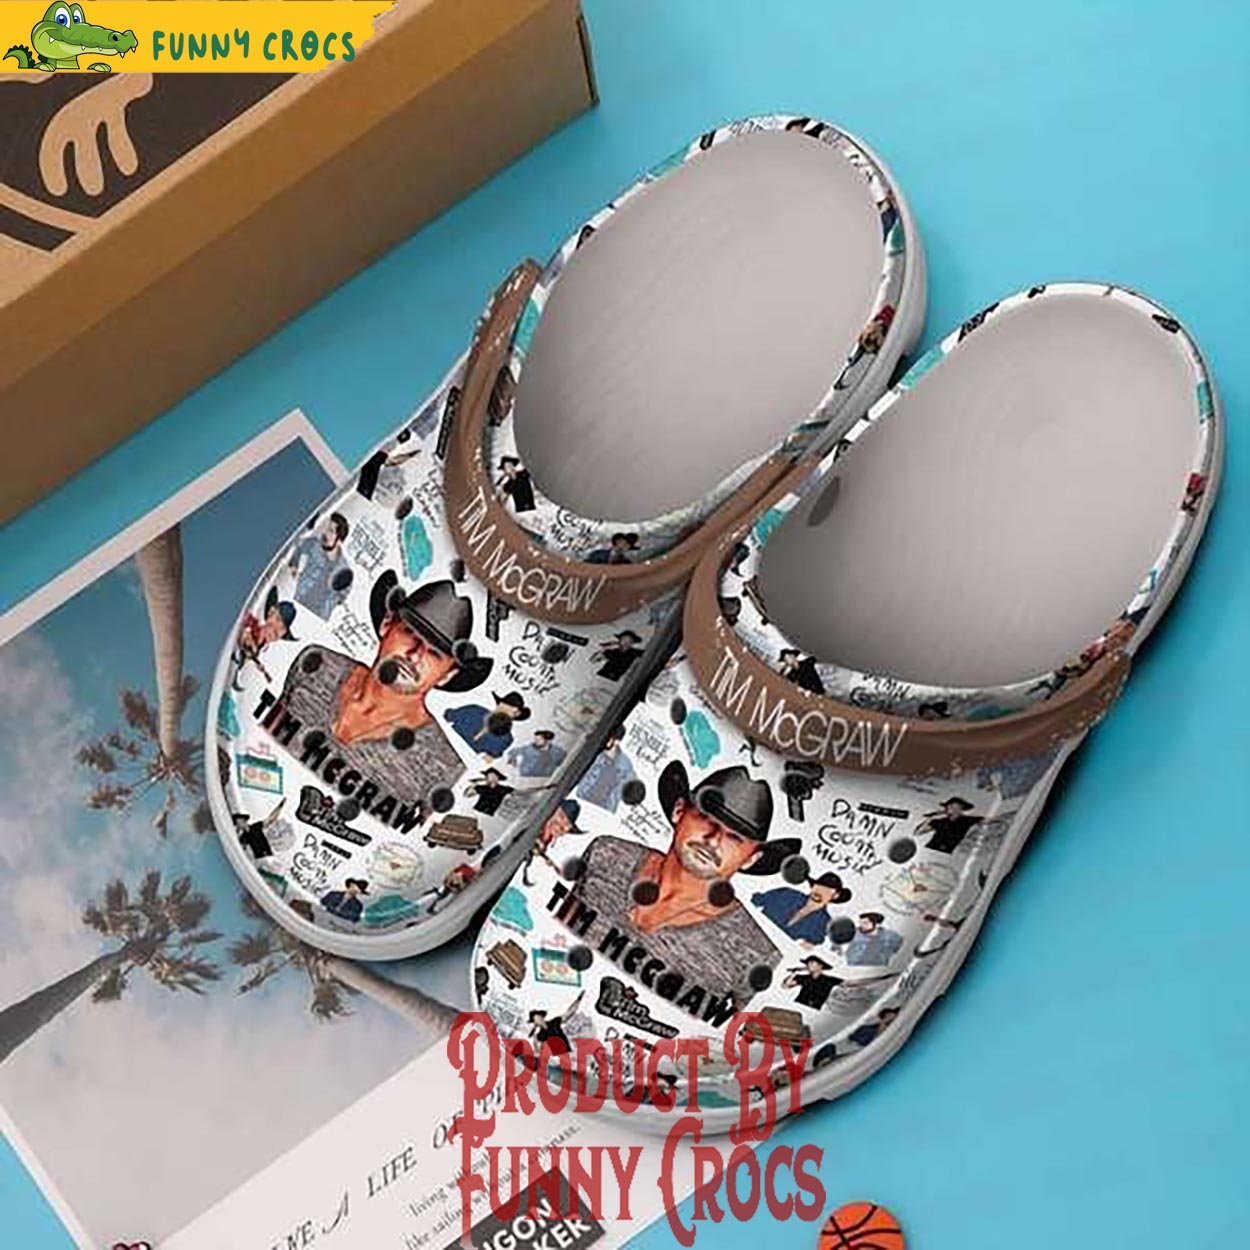 Tim Mcgraw Crocs Shoes - Discover Comfort And Style Clog Shoes With ...